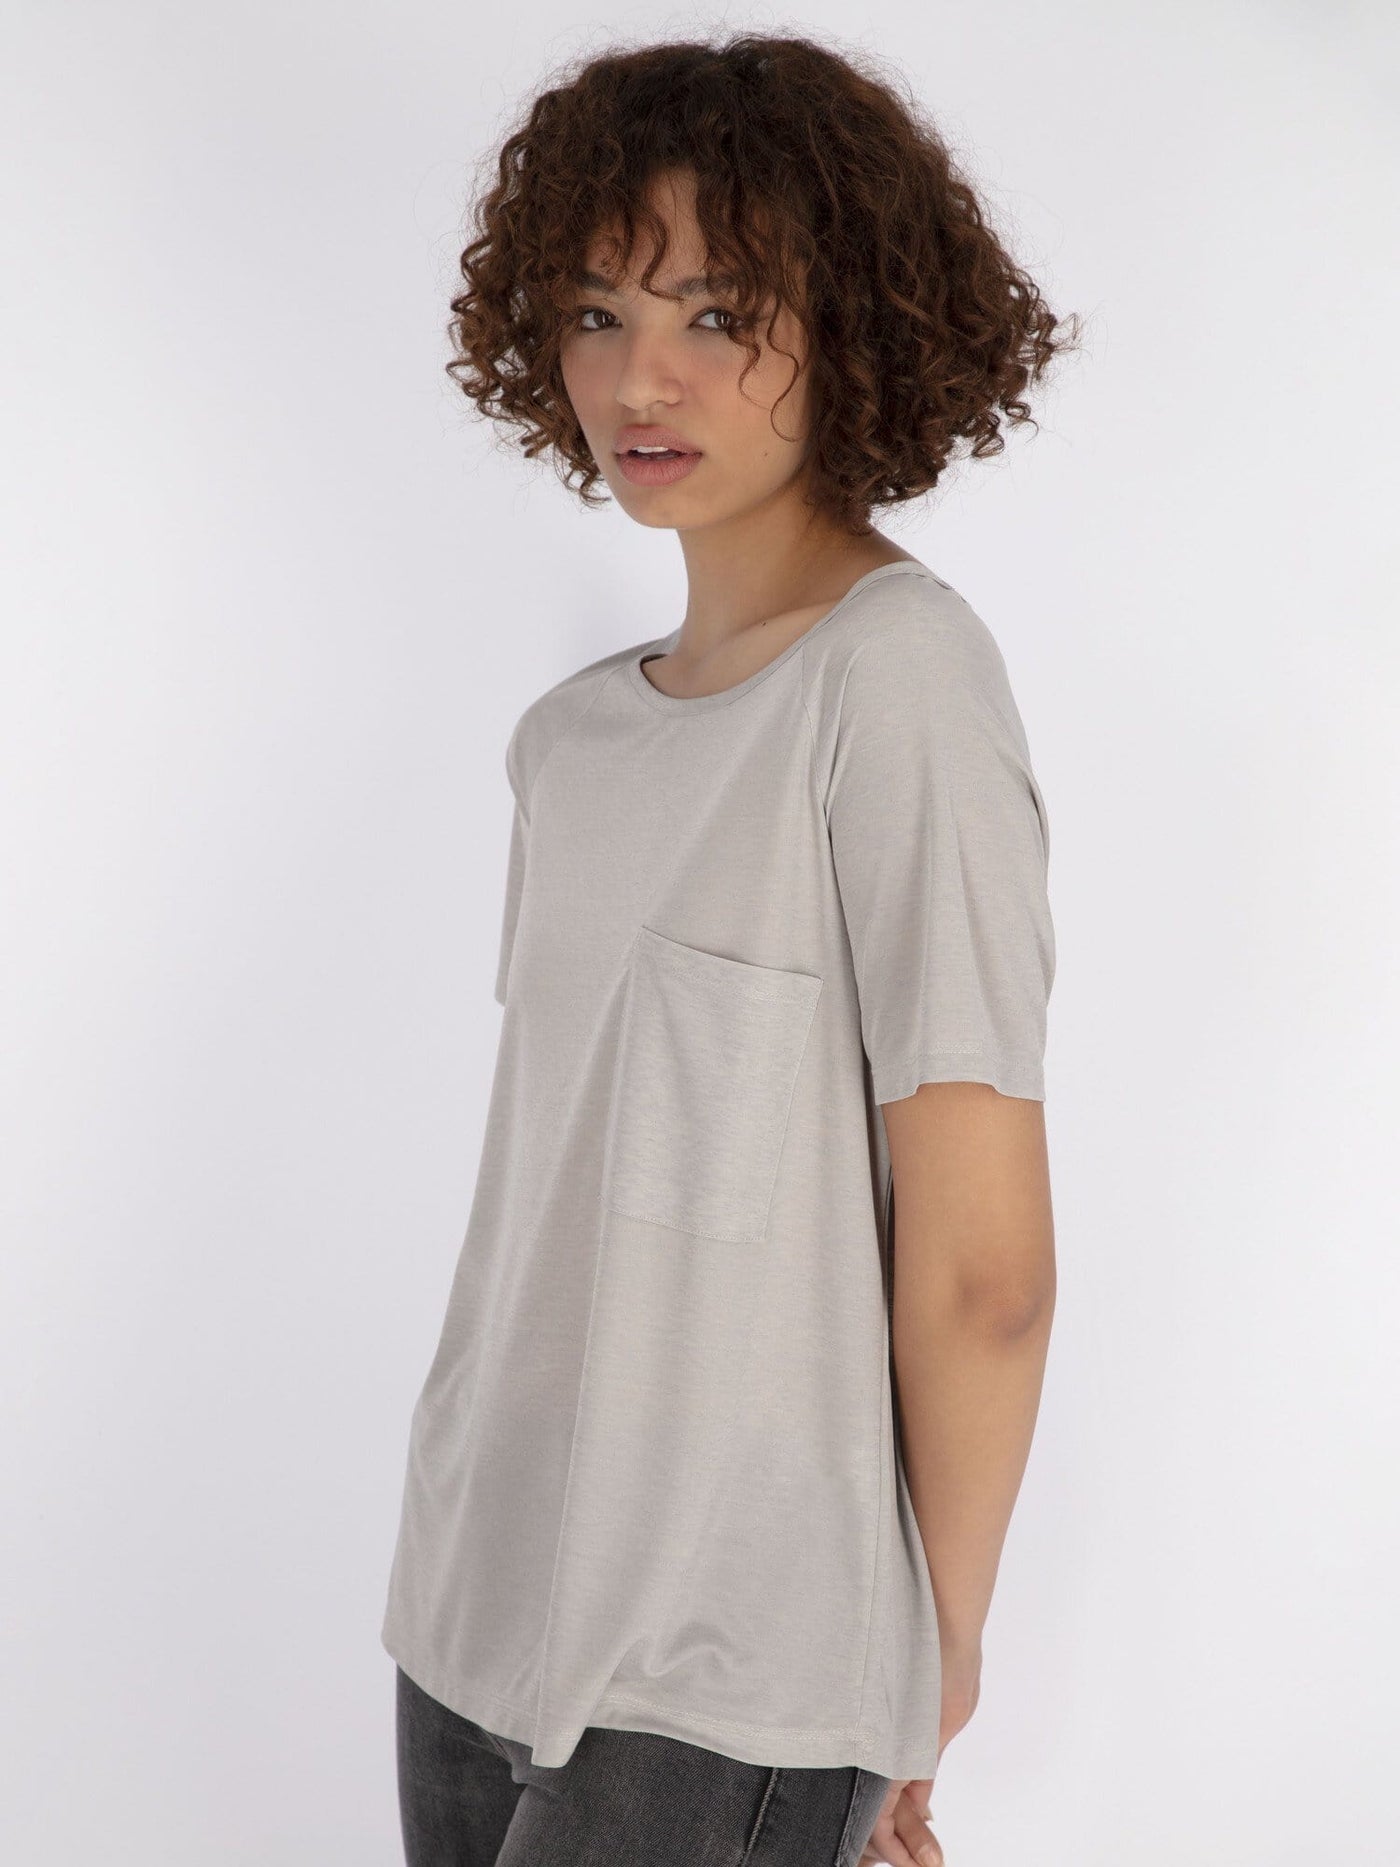 OR Tops & Blouses Short Sleeve Top with Round Neck